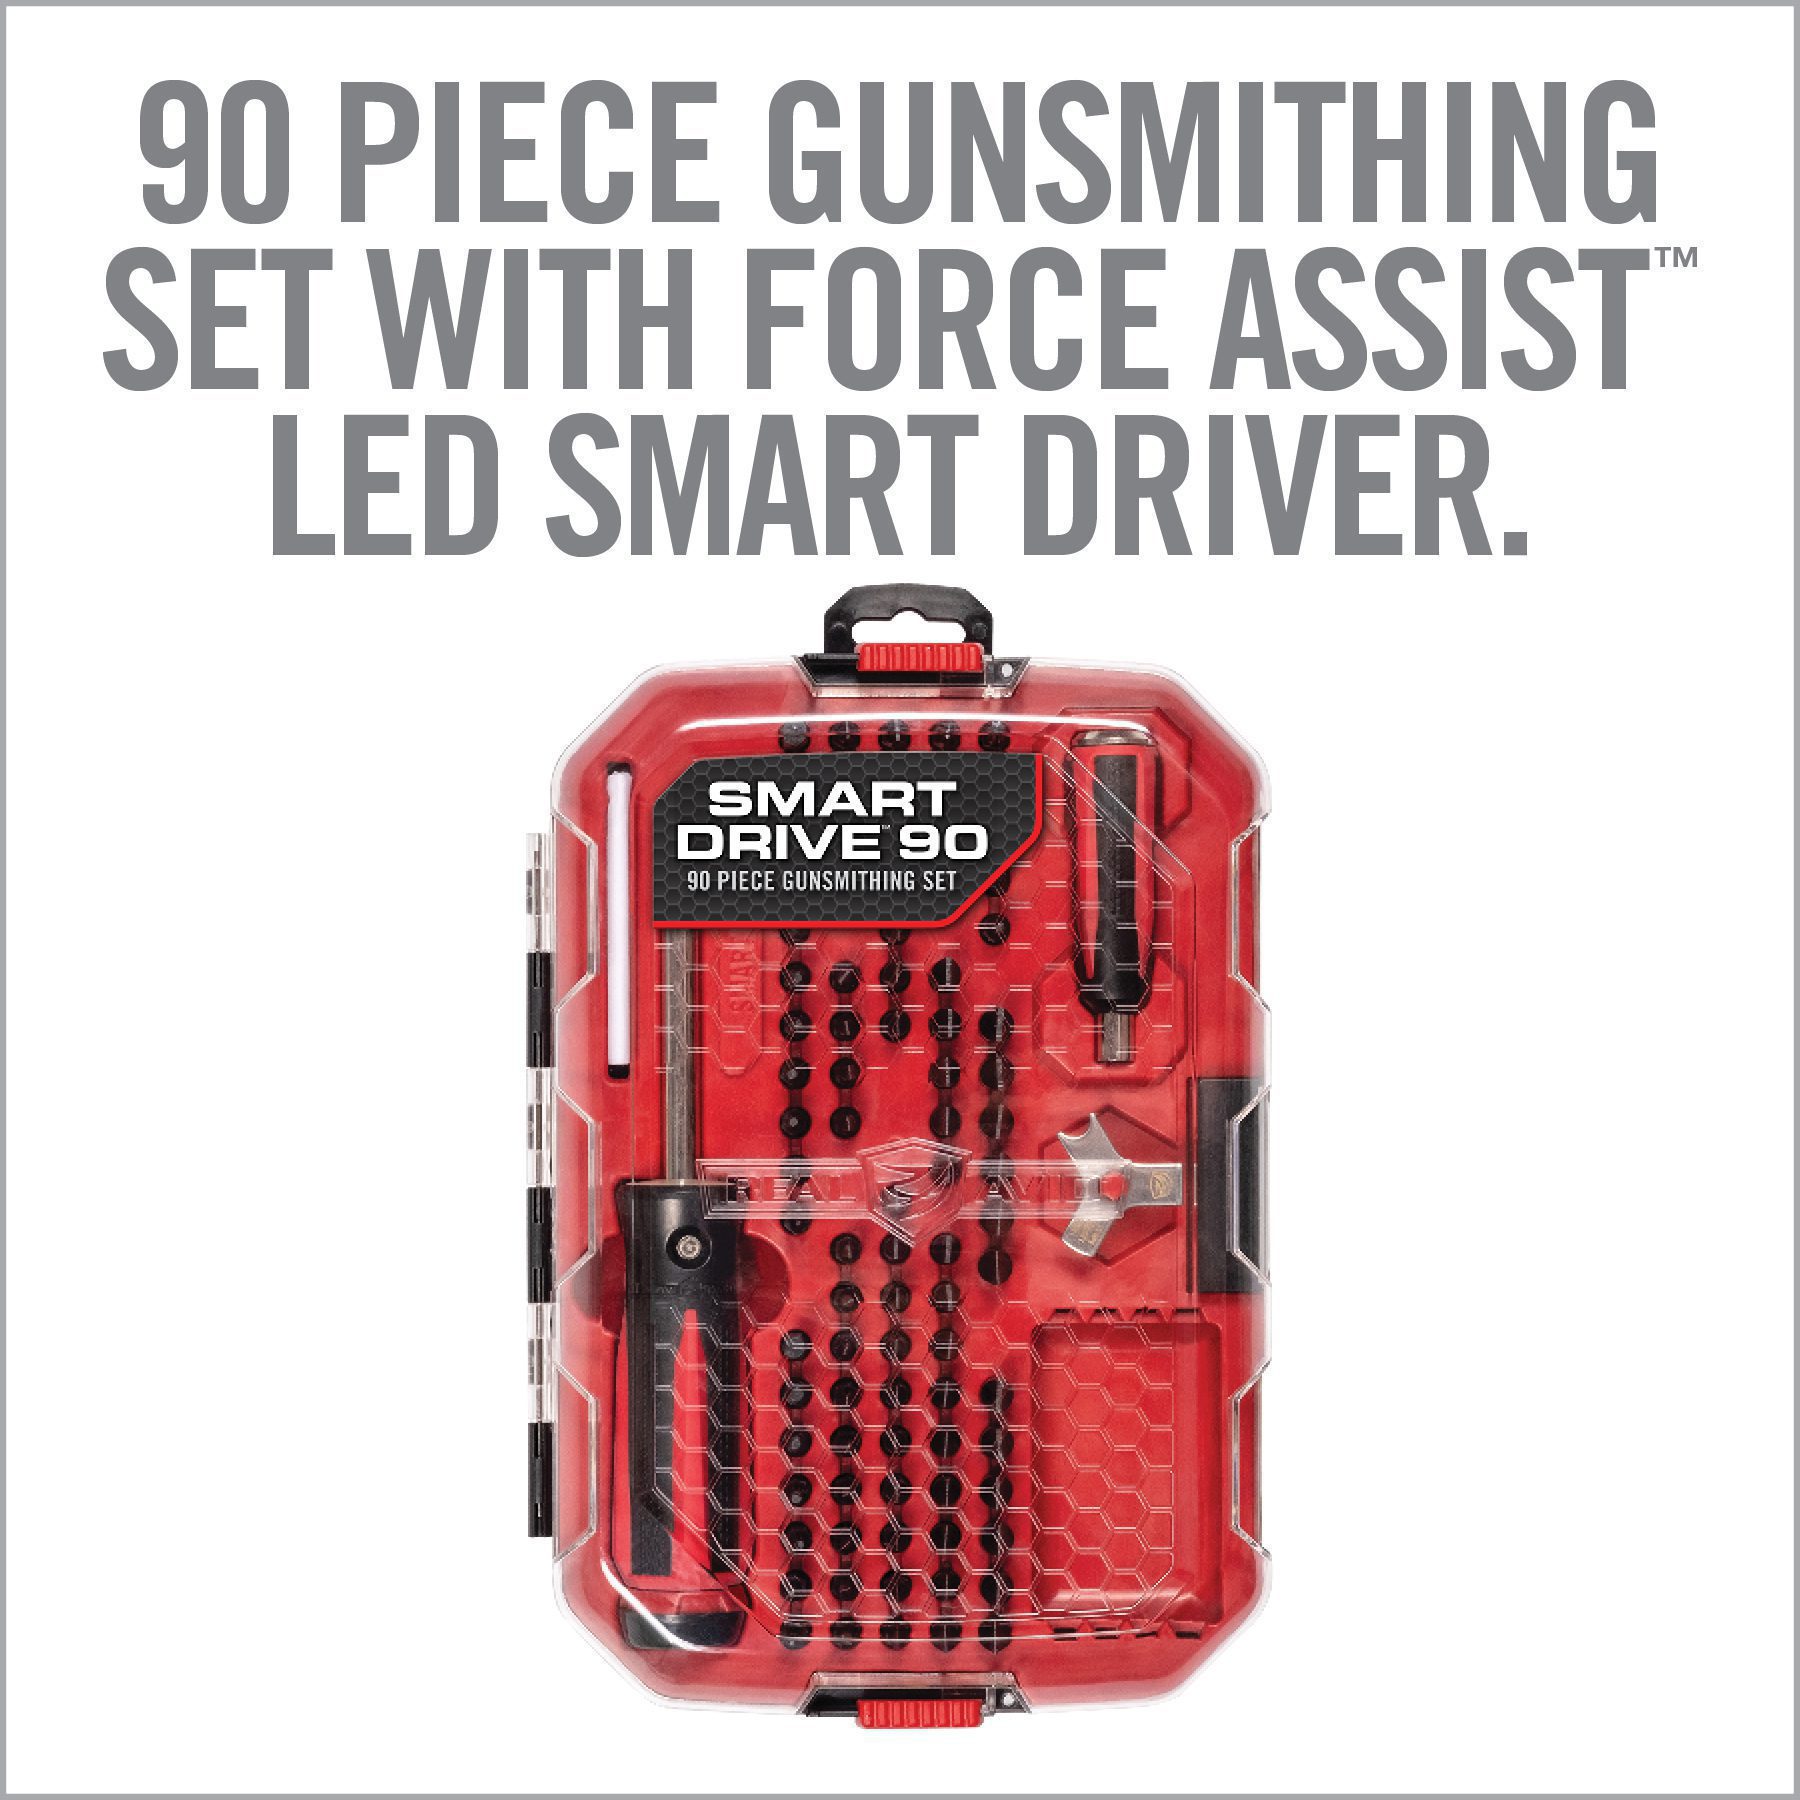 the smart drive 80 piece gun set with force assist